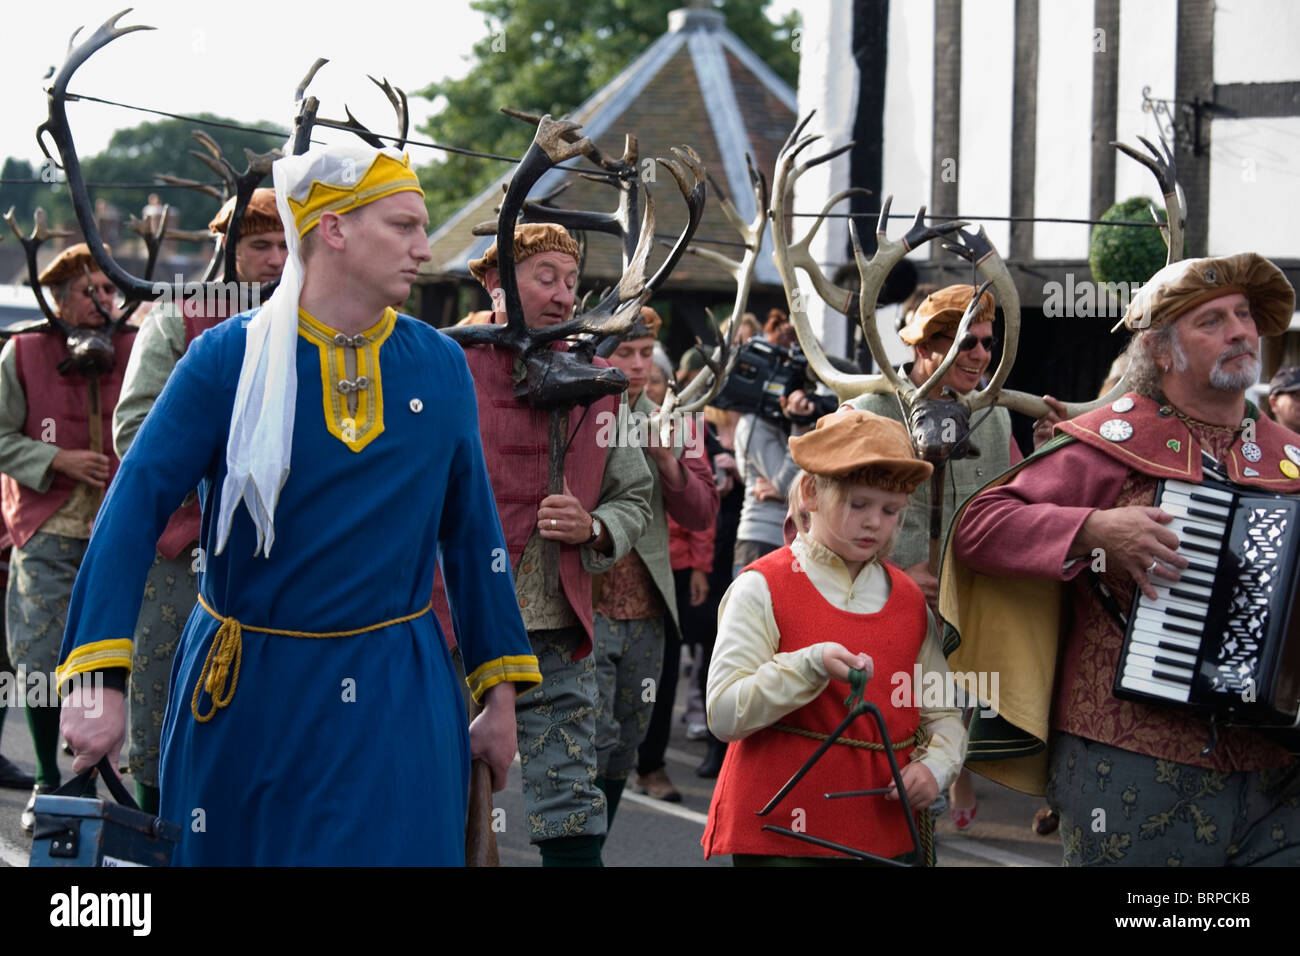 The Abbot's Bromley Horn Dance, Staffordshire, England Stock Photo